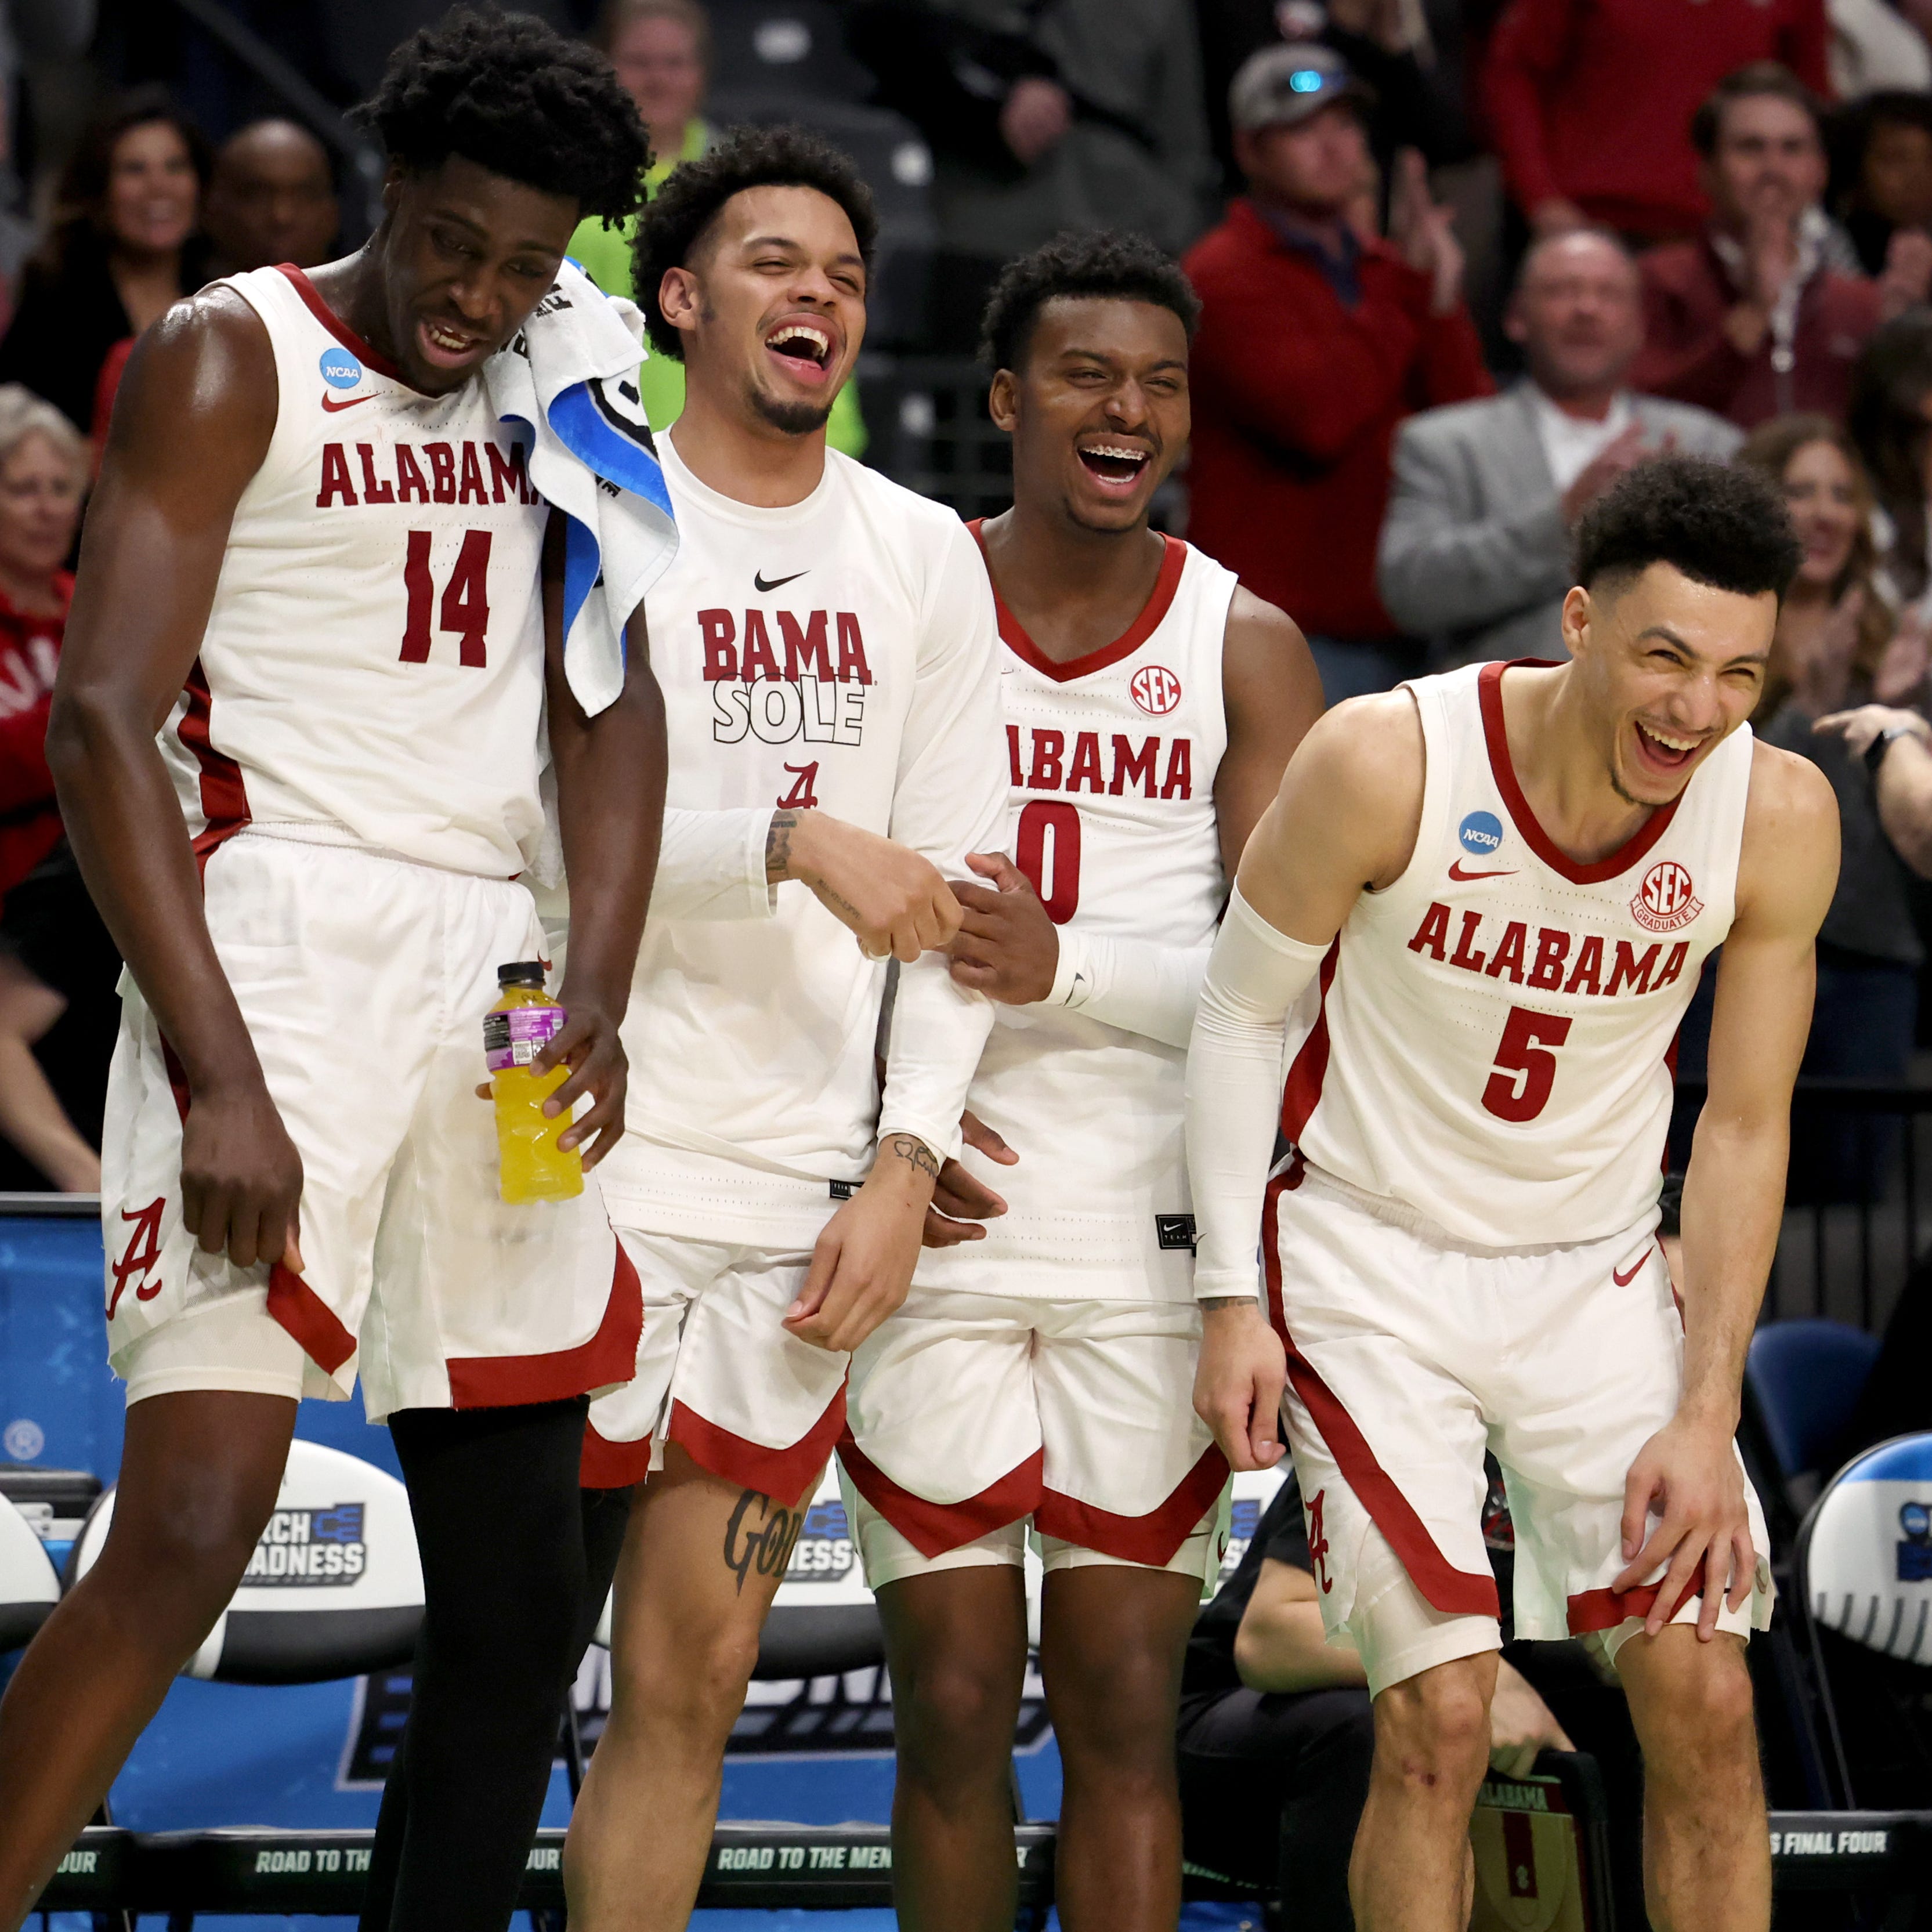 Alabama players on the bench celebrate near the end of the second half of the team's NCAA men's tournament game against Maryland at Legacy Arena.